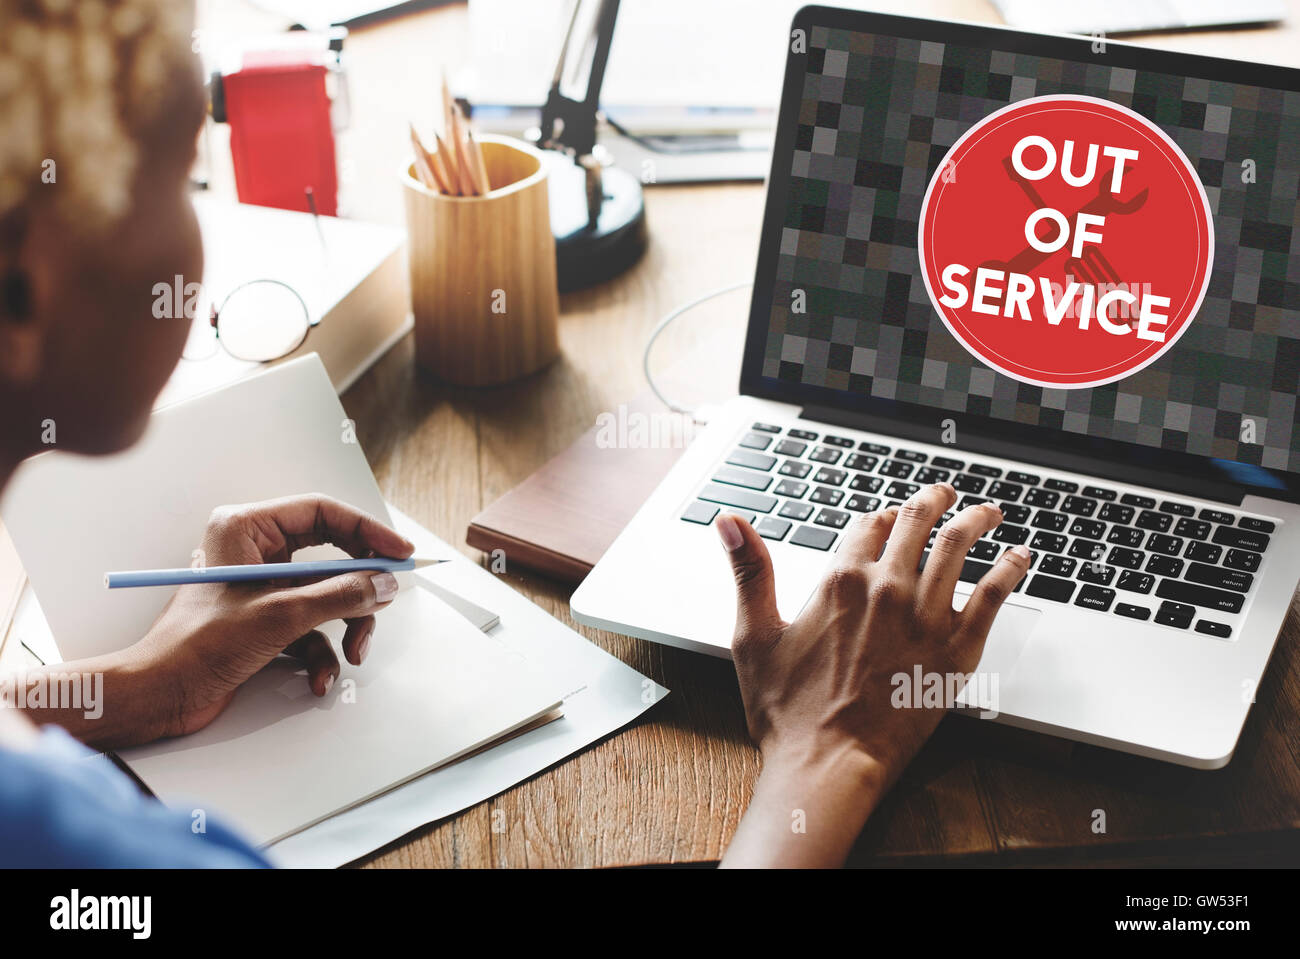 Out Of Service Sign Graphic Concept Stock Photo